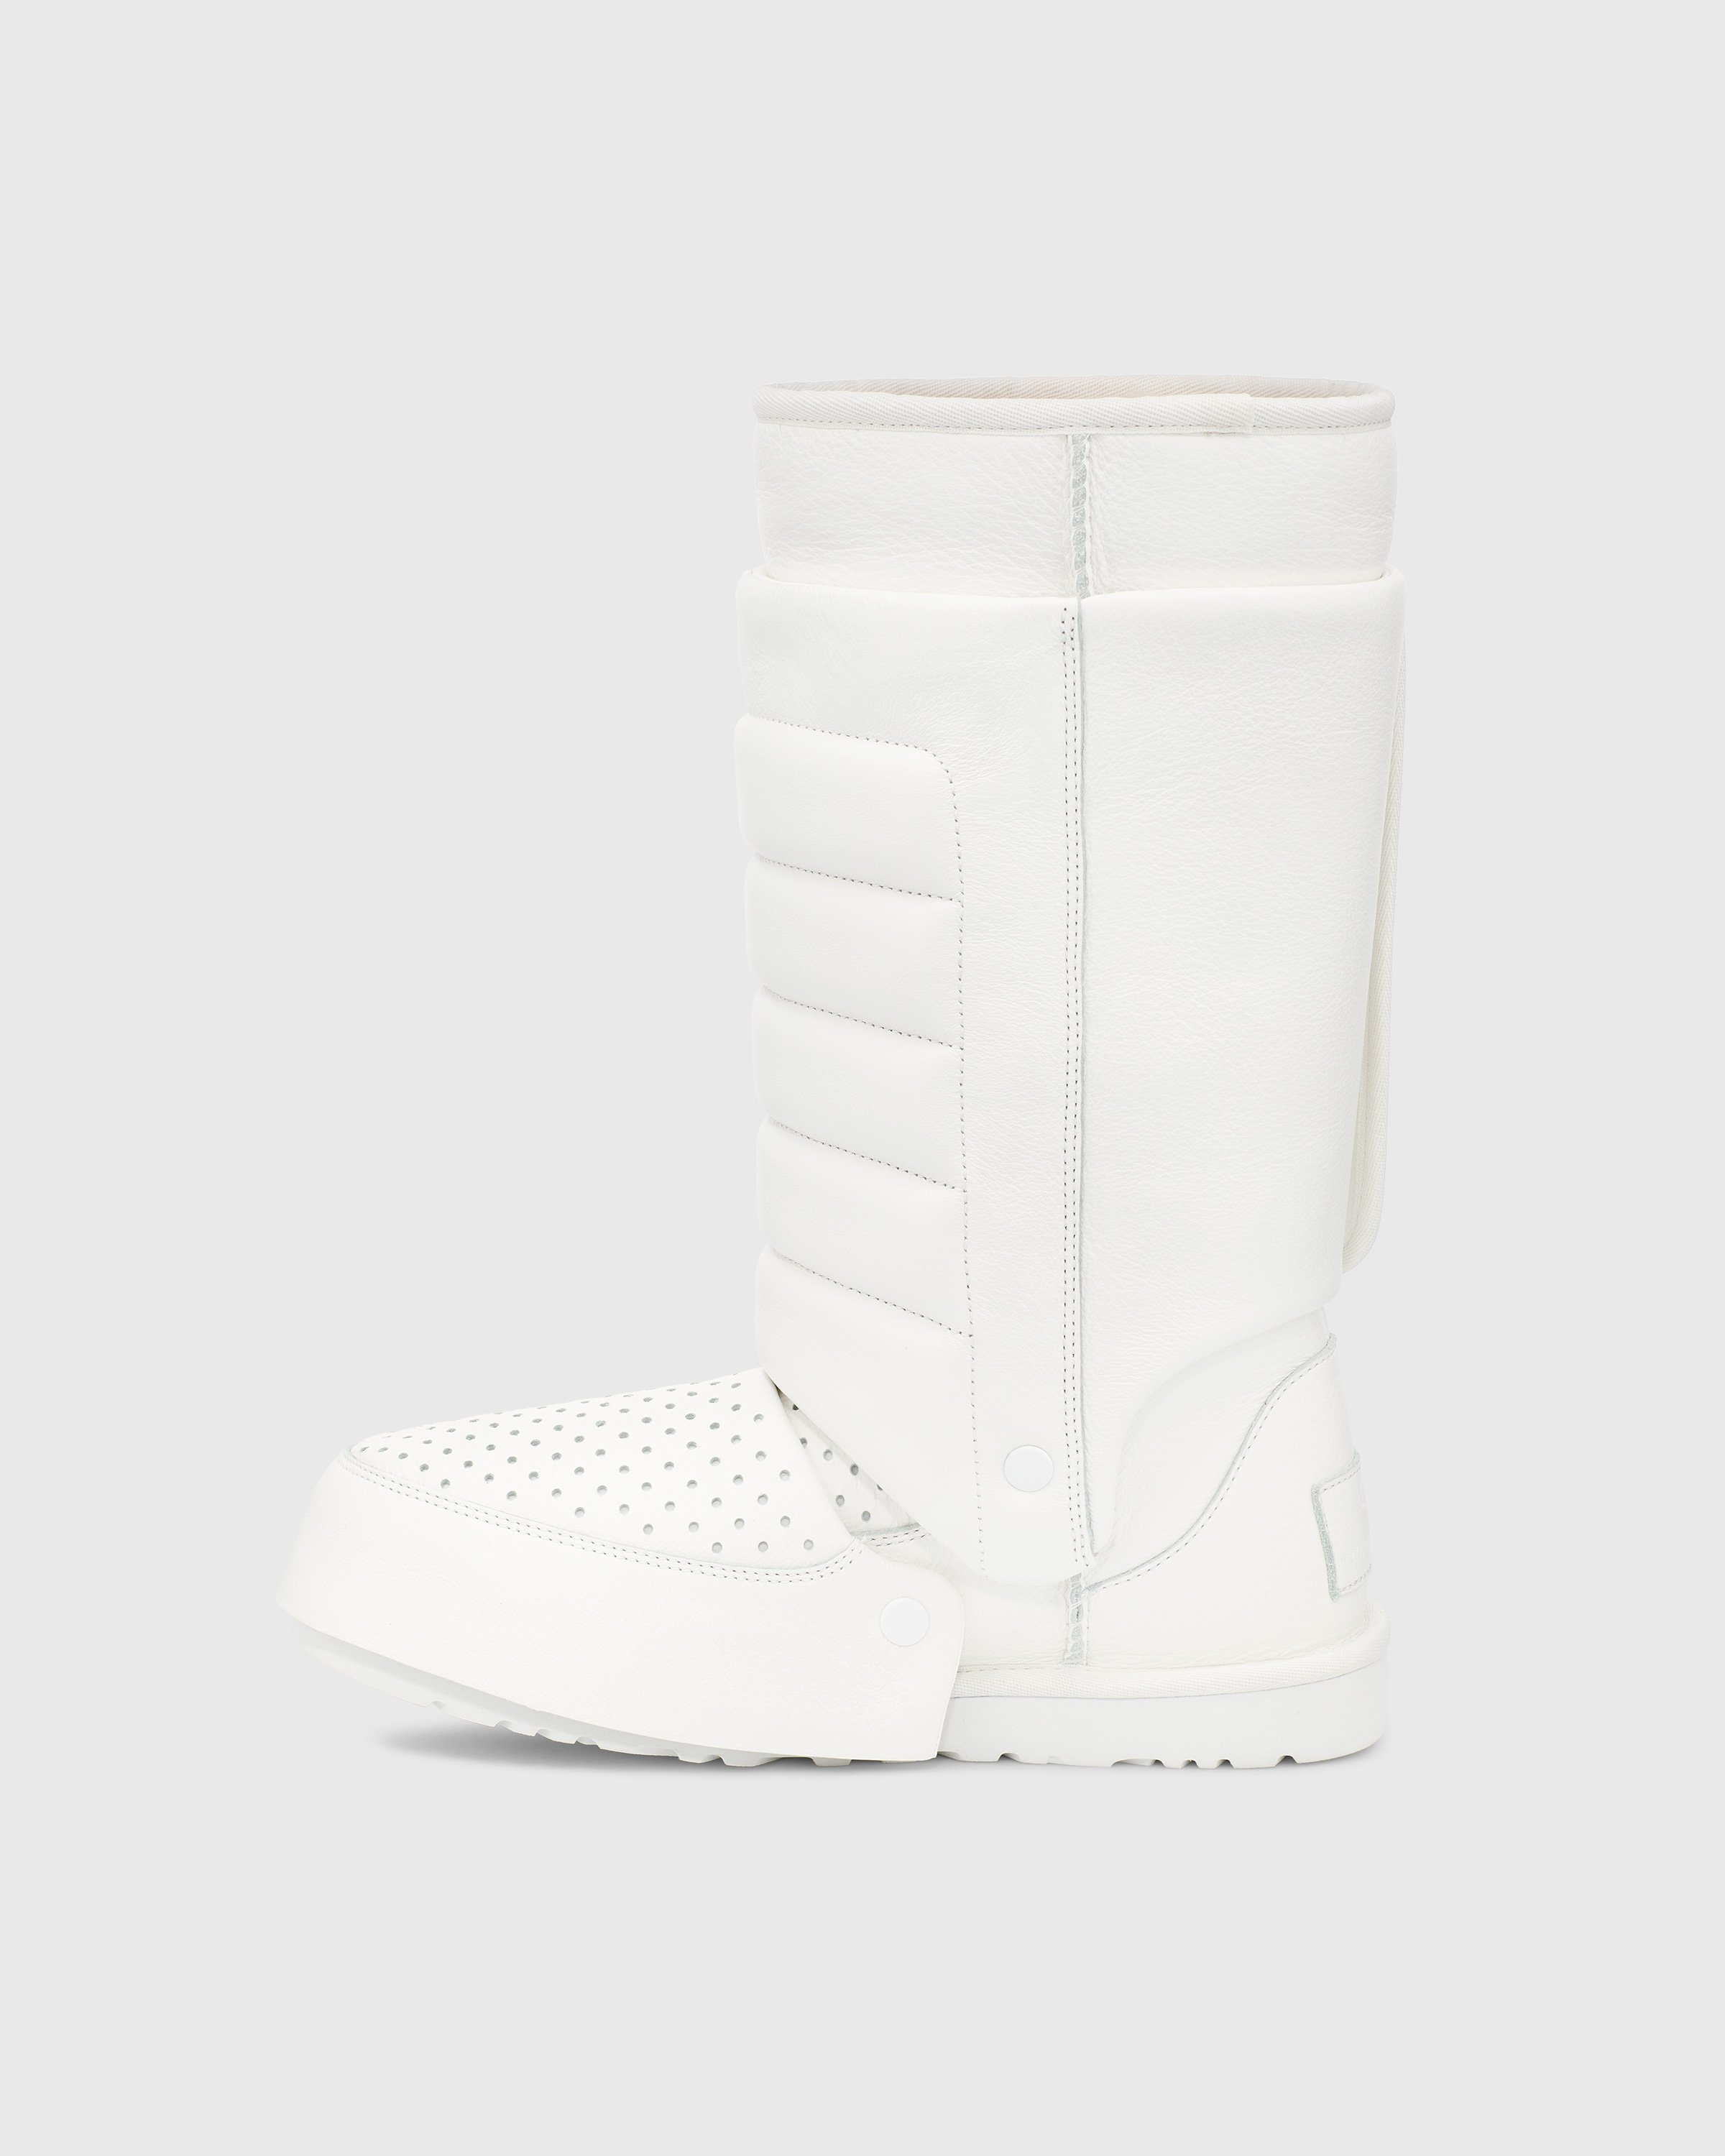 Ugg x Shayne Oliver - Tall Boot White - Footwear - White - Image 2